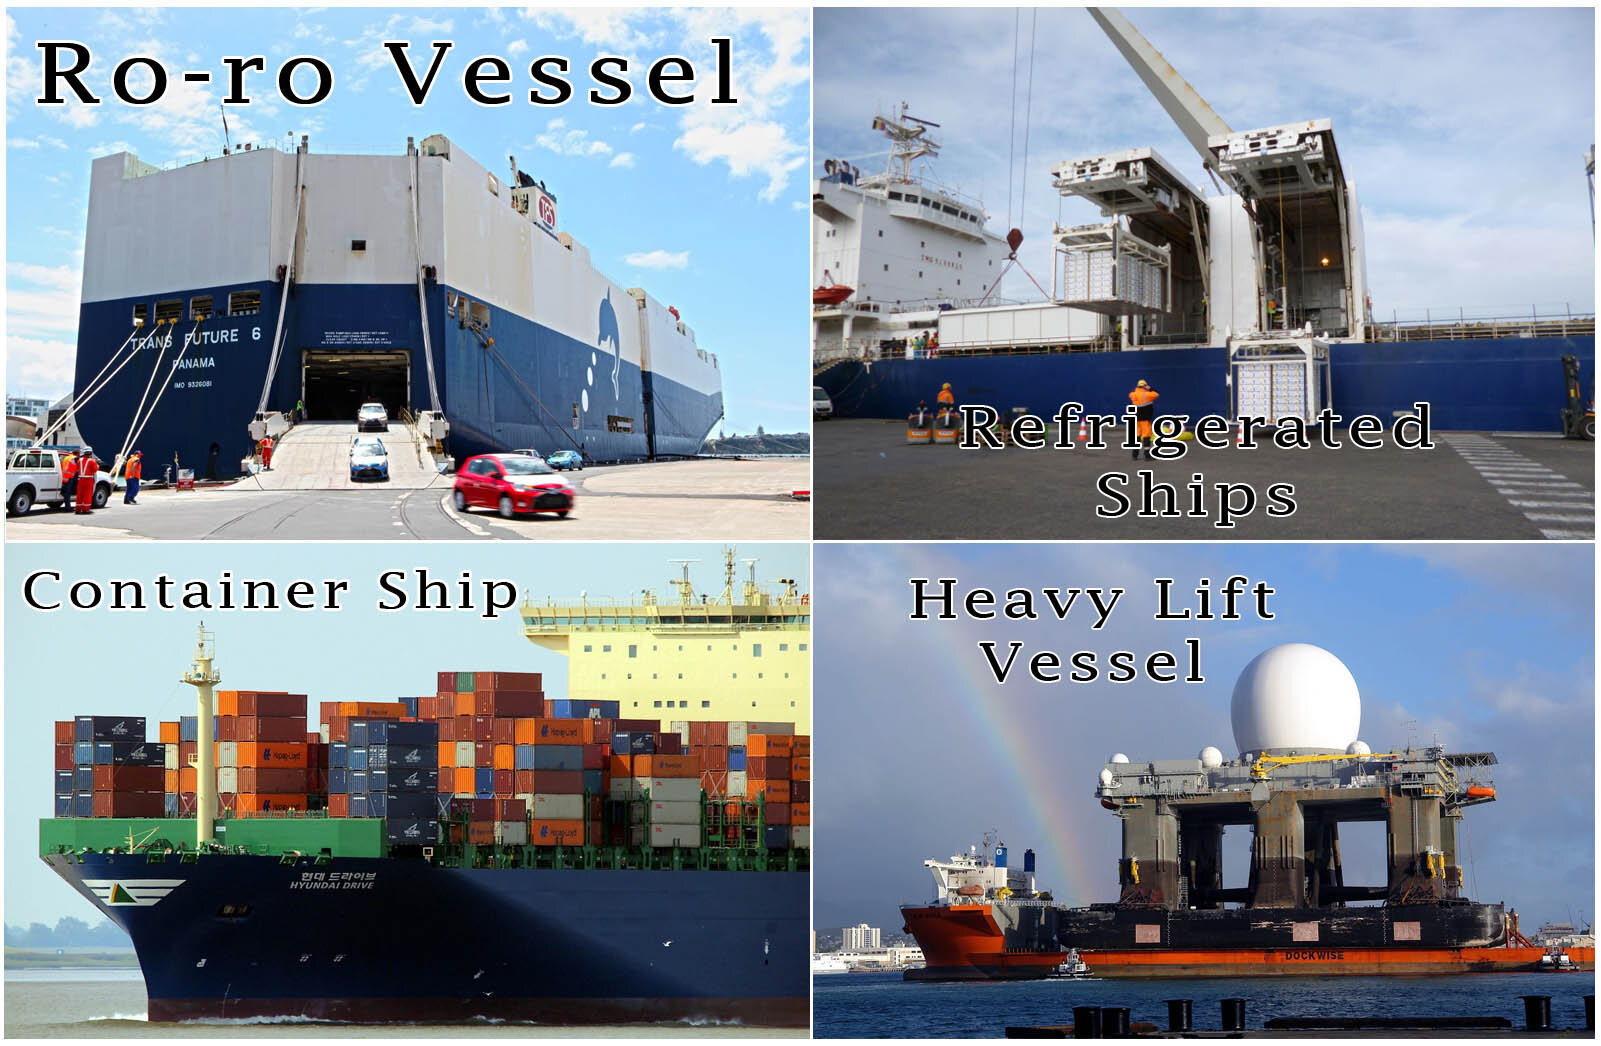 Dry Cargo Merchant ships: Ro-ro Vessel, Reefer, Container ship and Heavy Lift Vessels